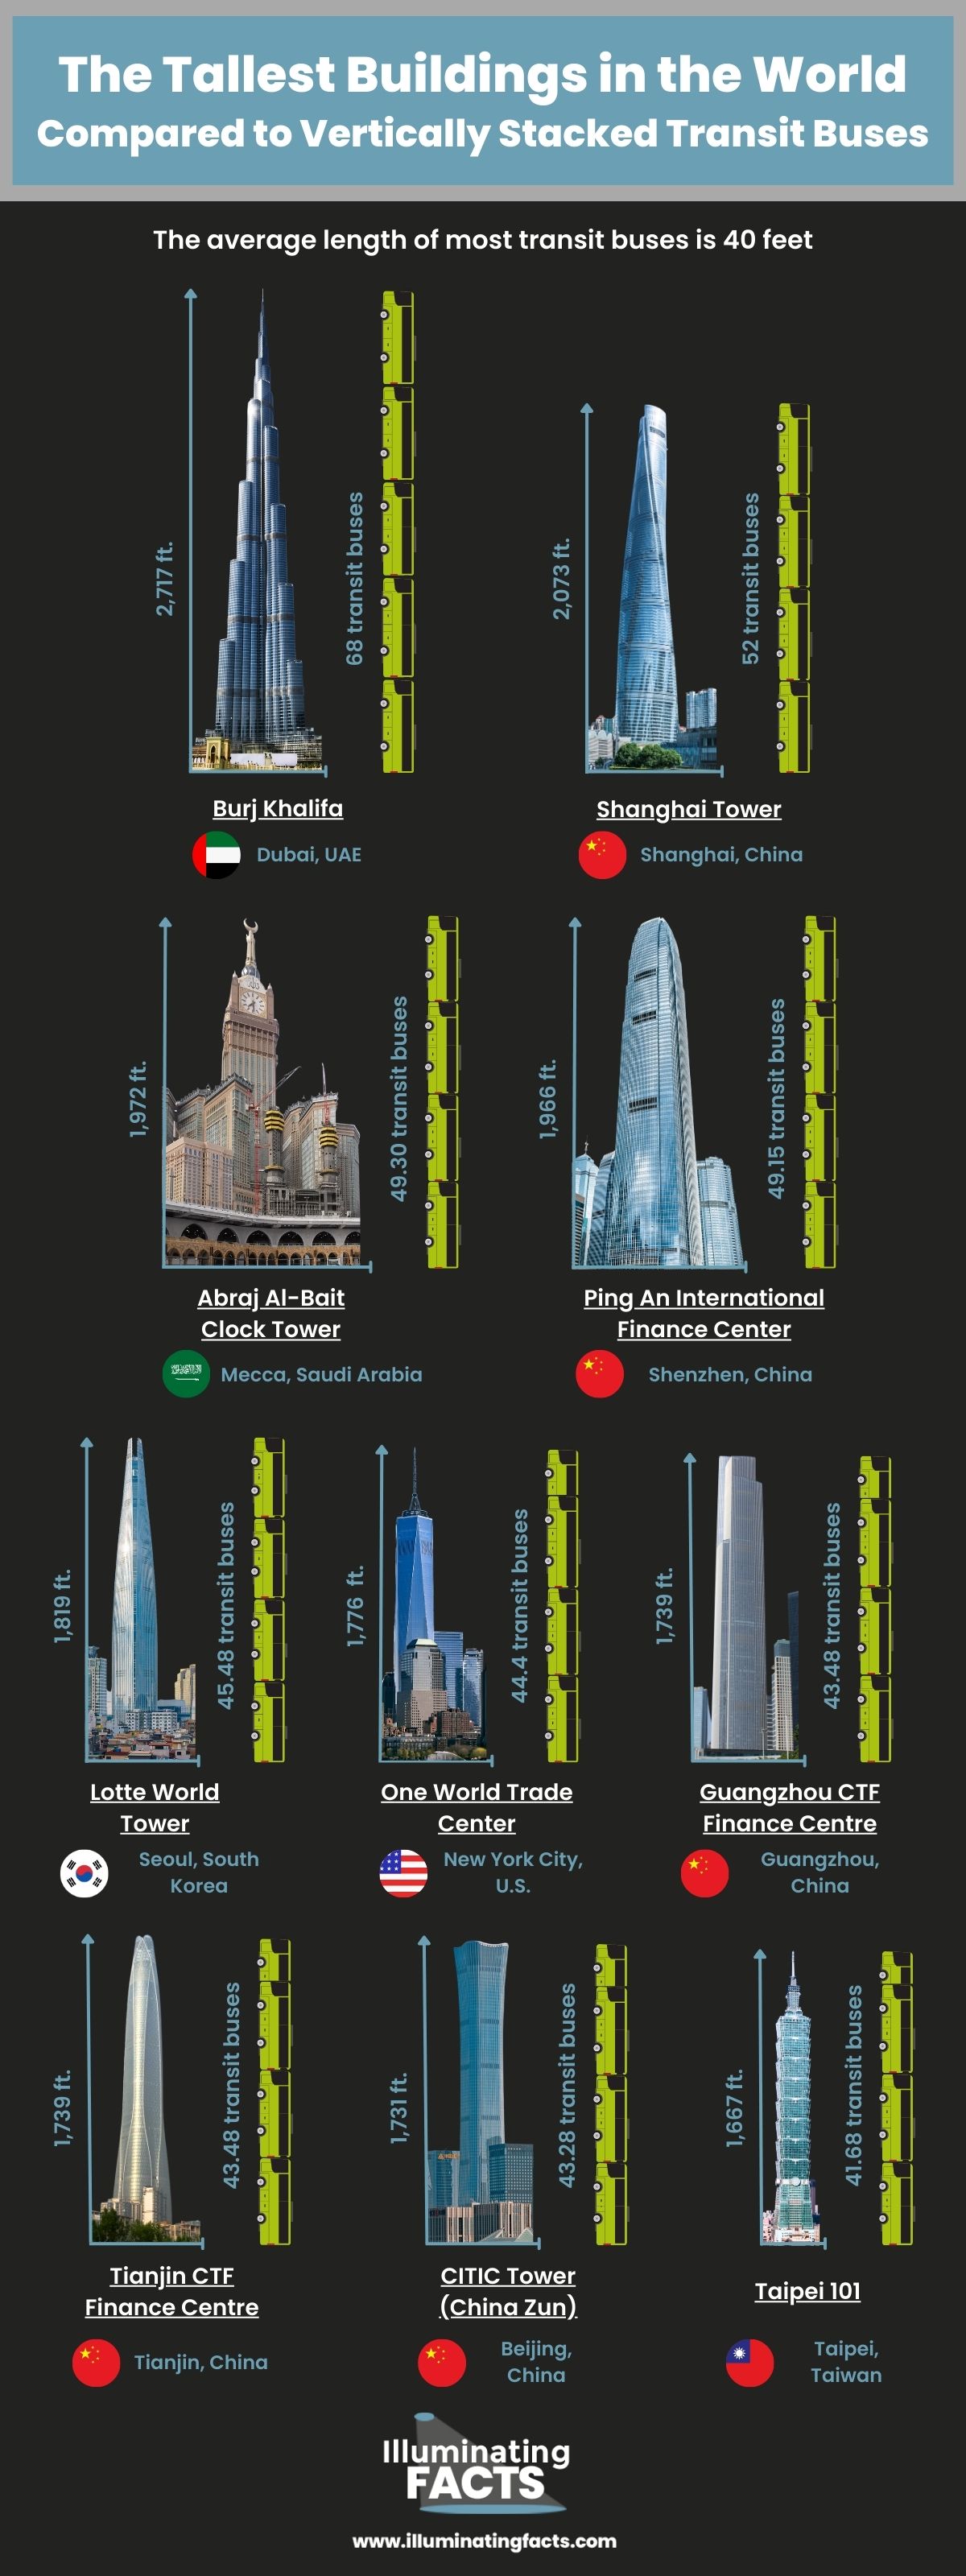 The Tallest Buildings in the World Compared to Transit Buses